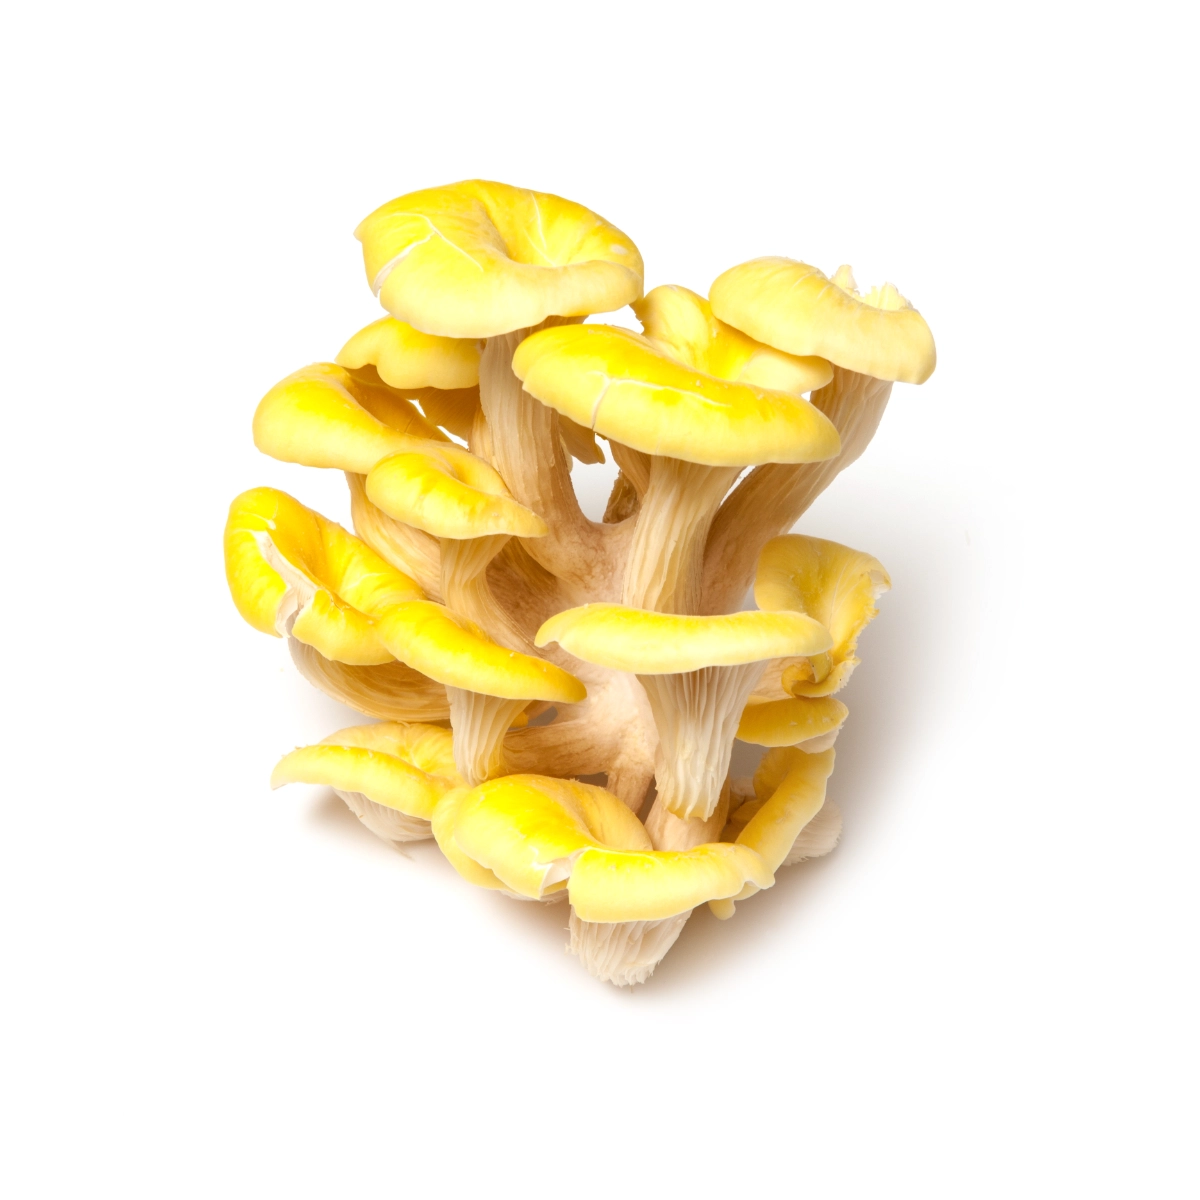 golden-oyster-mushrooms-pure-gold